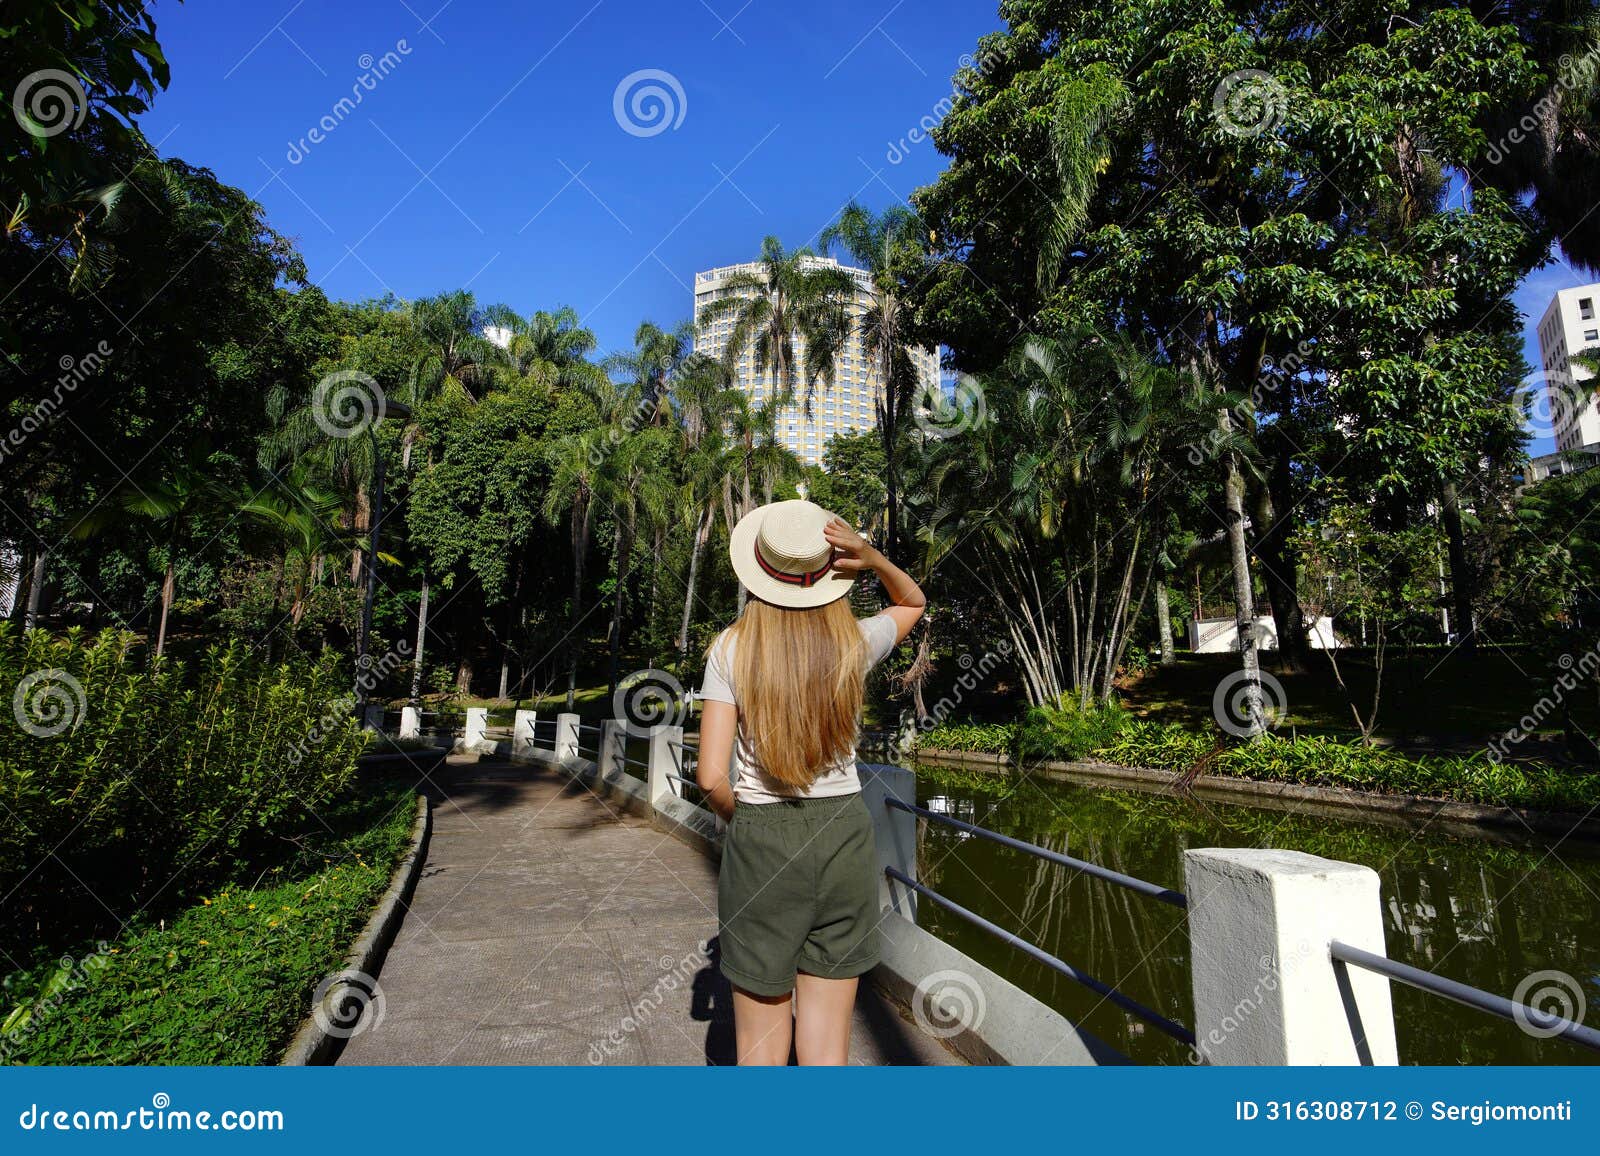 visiting belo horizonte, brazil. back view of young woman in the municiapl parque americo renne giannetti, a city park in belo